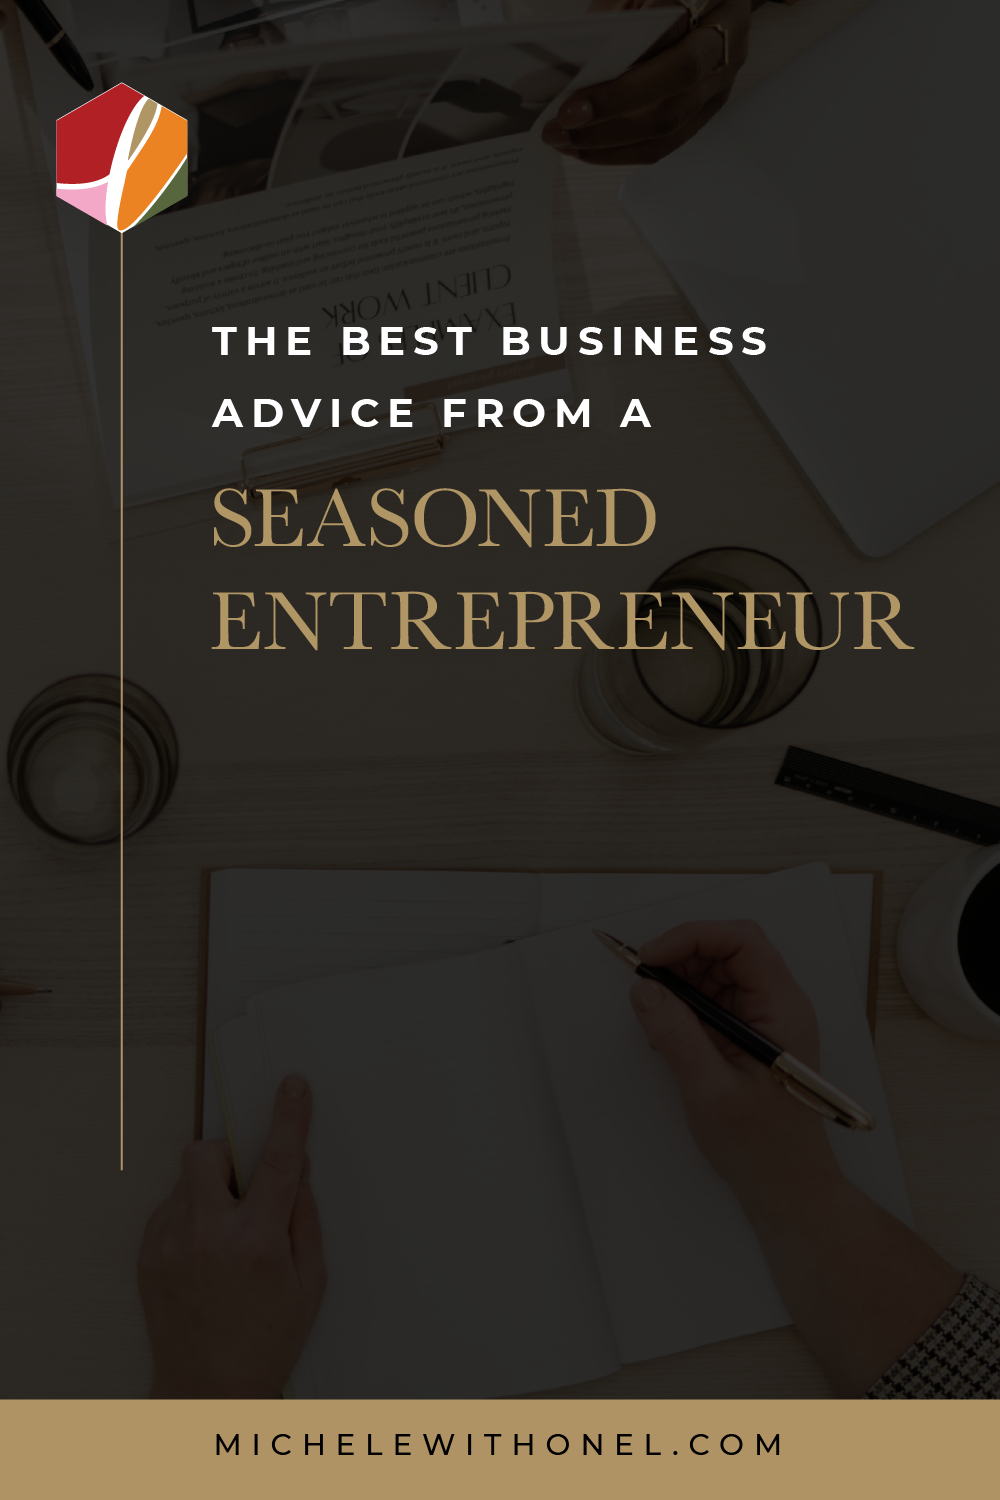 Looking for some career advice for entrepreneurs? This post is for you! You will learn my tried and true tips as a seasoned entrepreneur — including business advice, tips for small business owners, and entrepreneurship guidance. #entrepreneur #business #advice #success